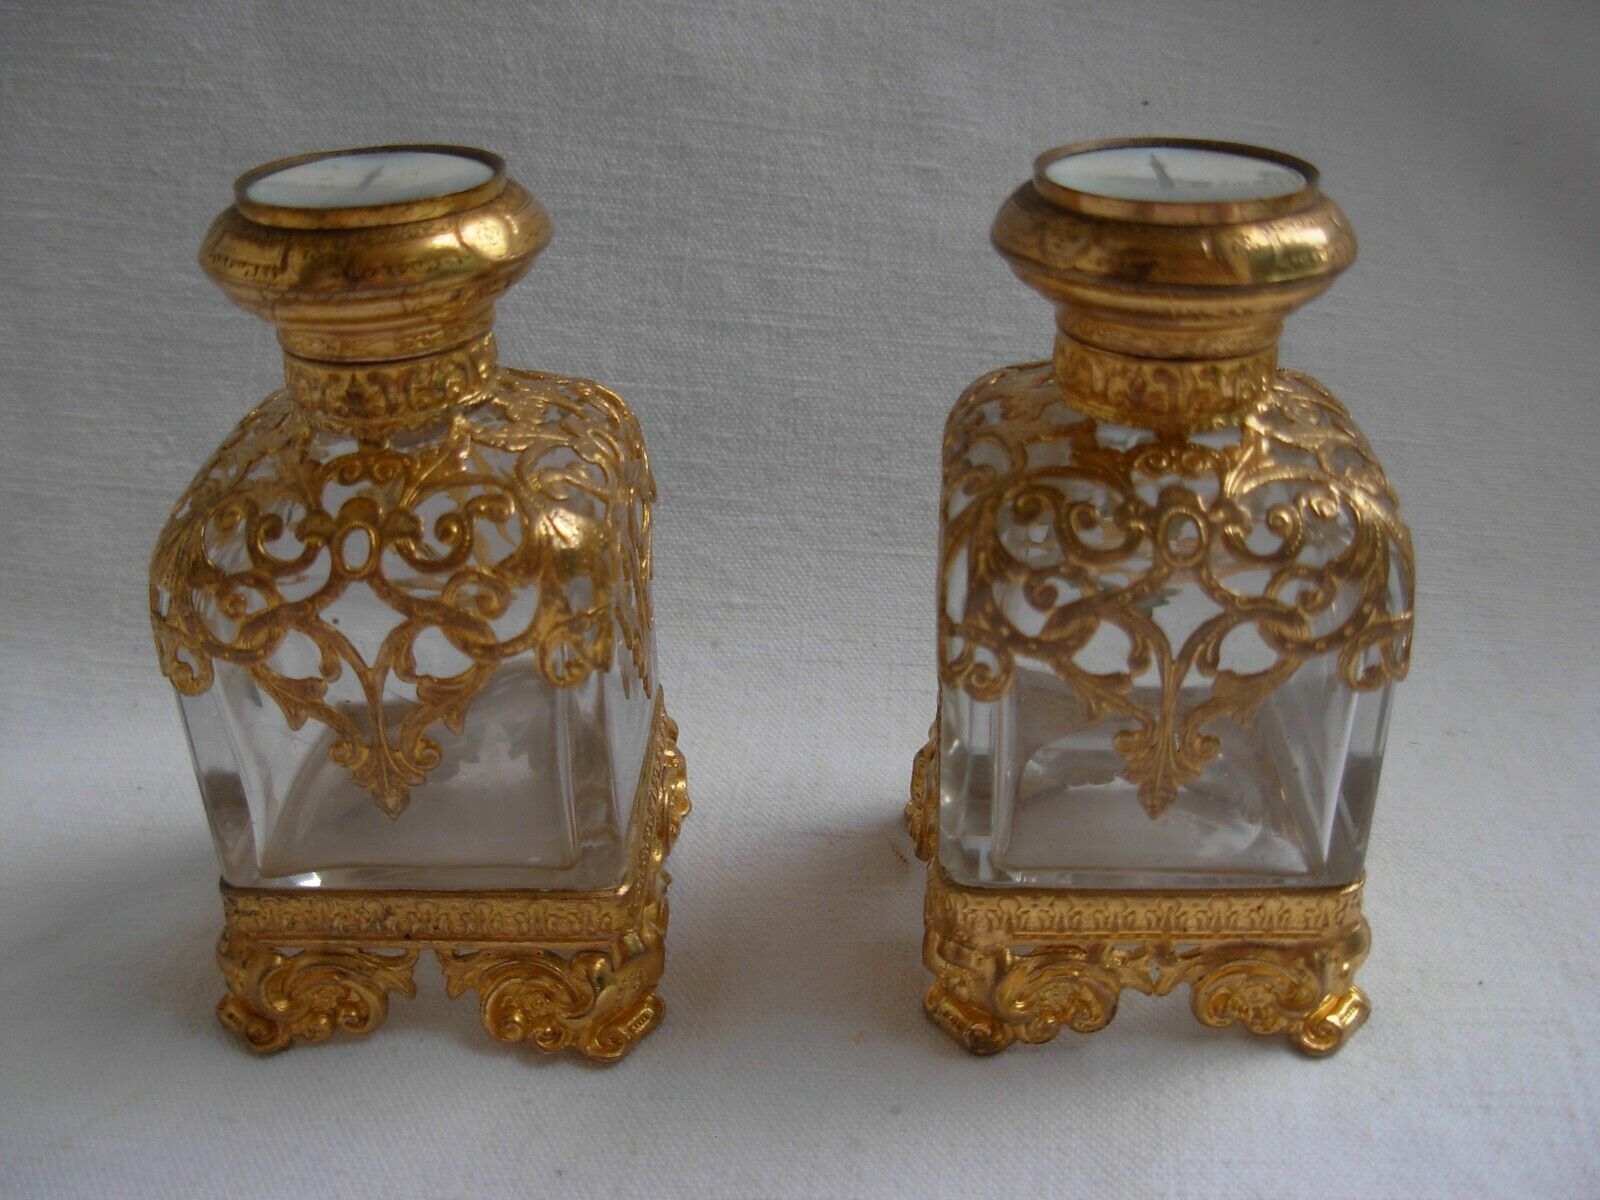 PAIR OF ANTIQUE FRENCH GILT BRASS CRYSTAL PERFUME BOTTLES,NAPOLEON III PERIOD.